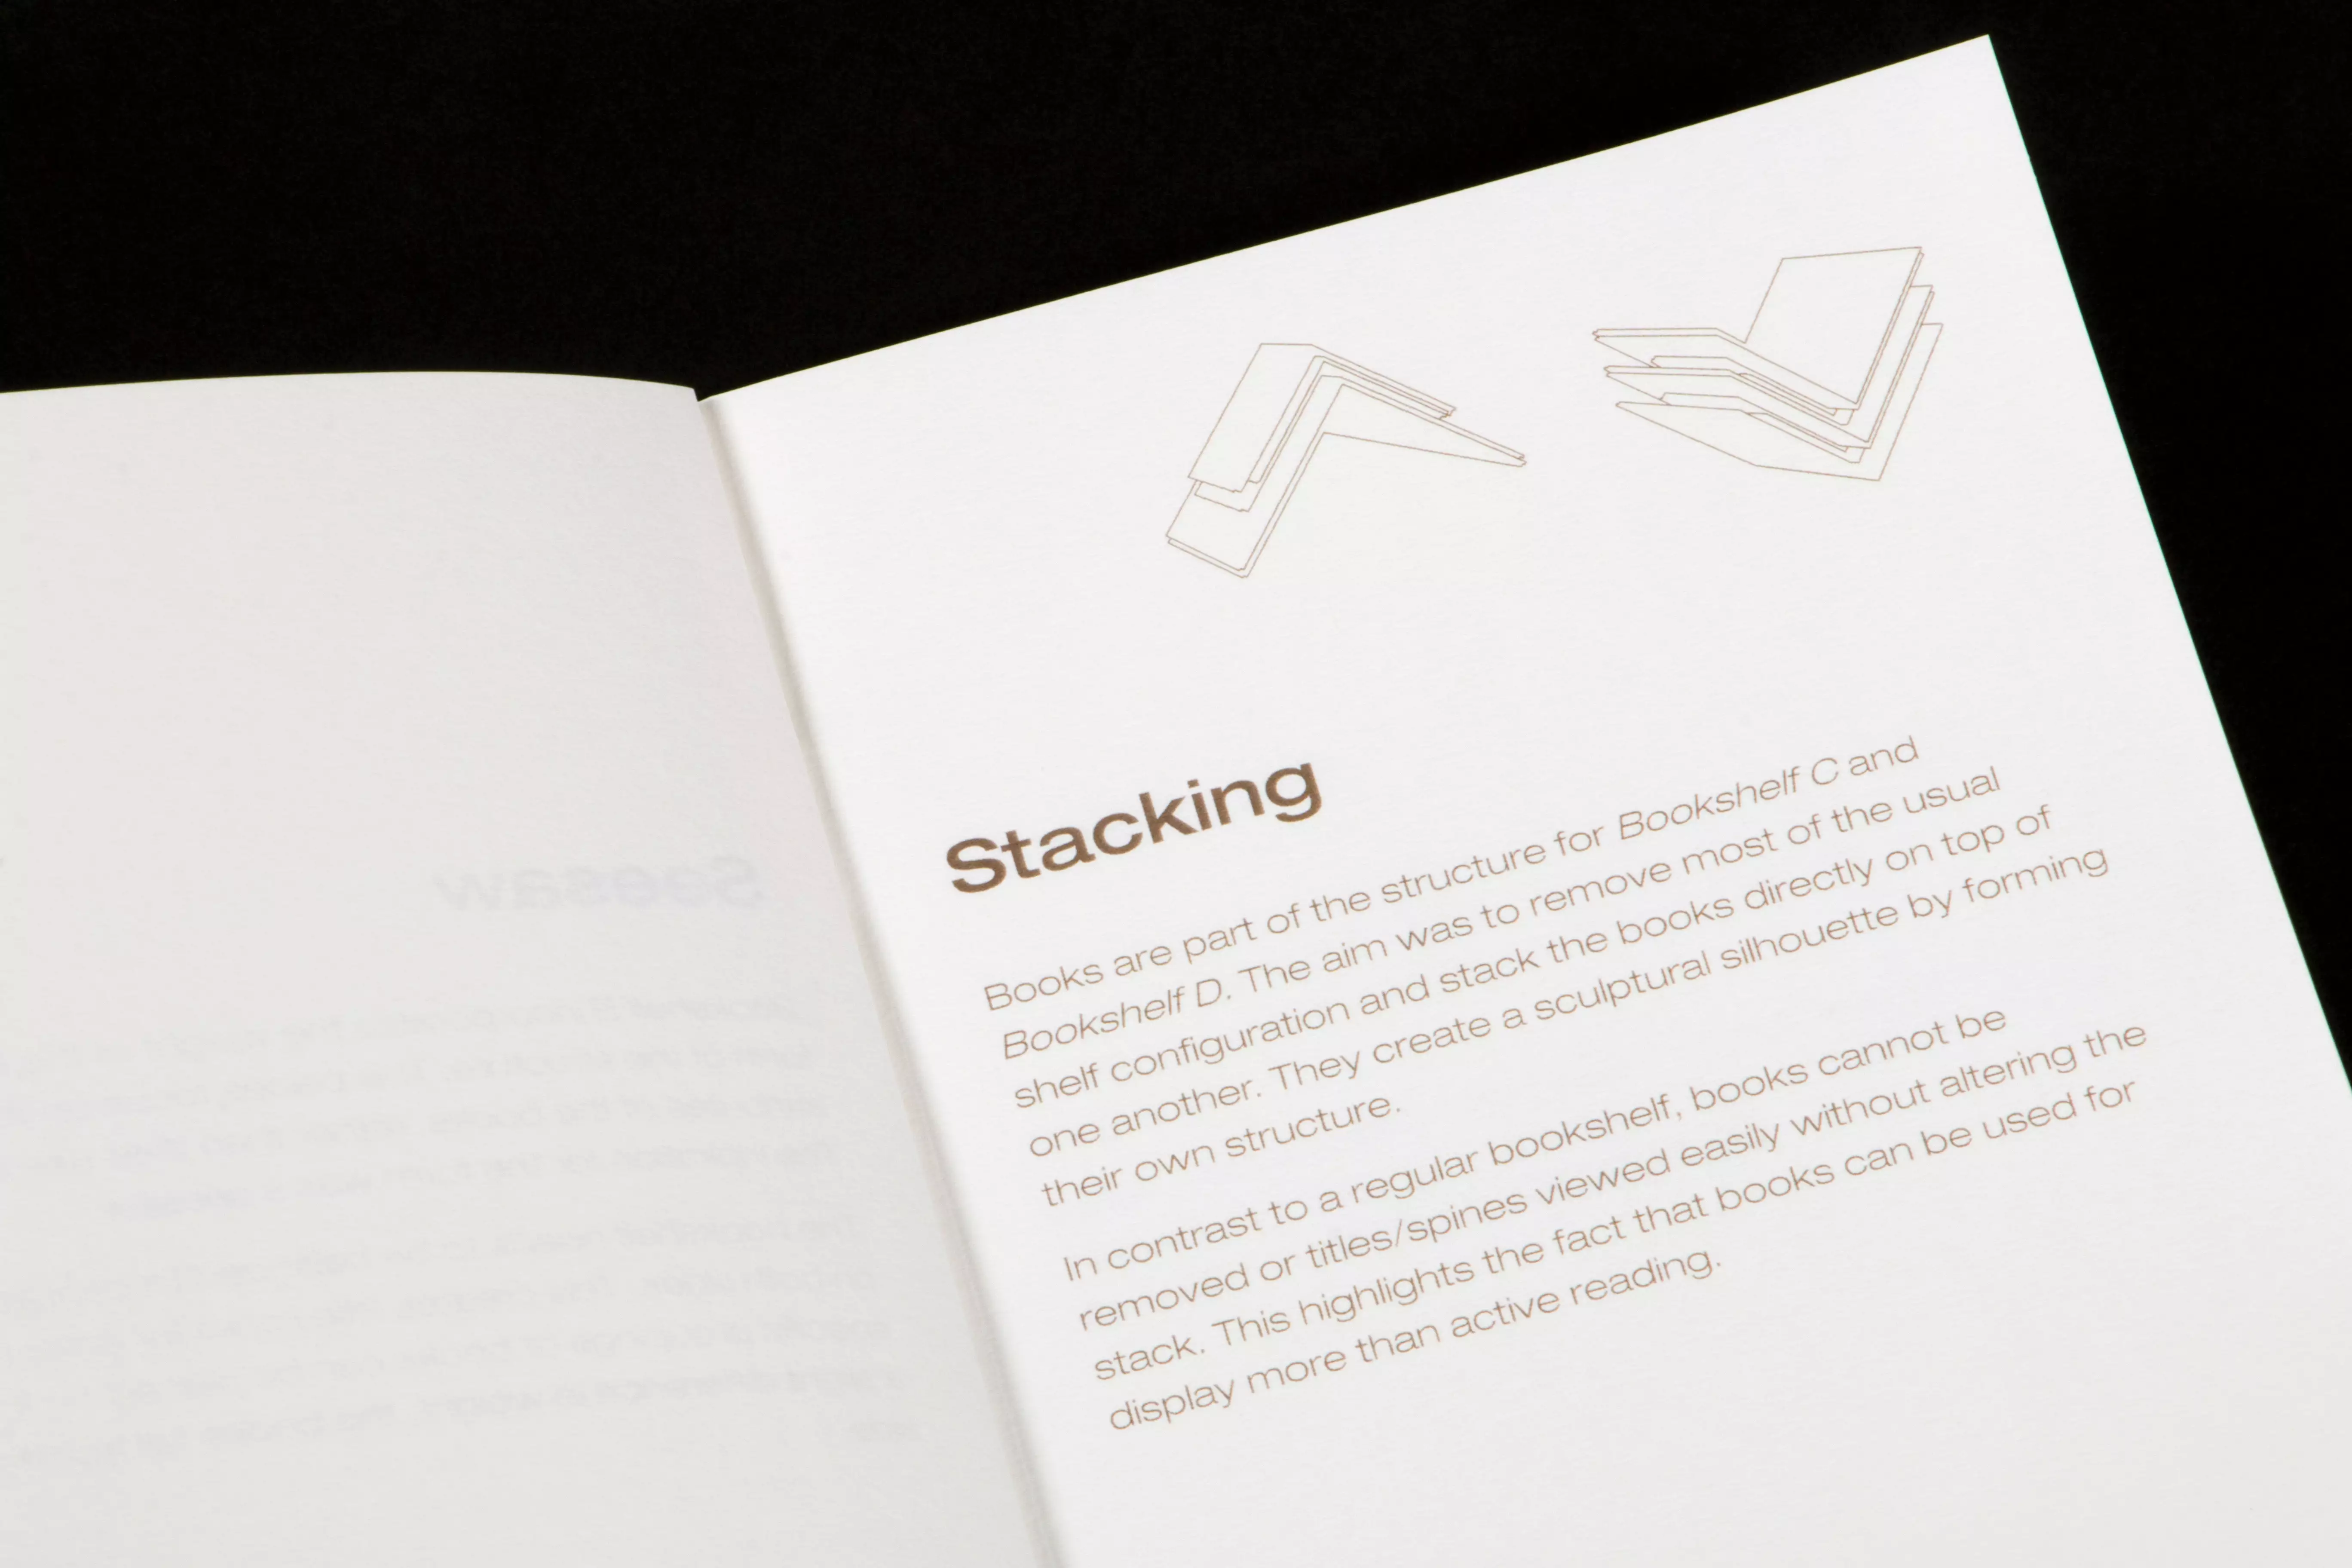 A detail shot of a spread from the accompanying catalogue depicting the research behind two of the bookshelf forms.